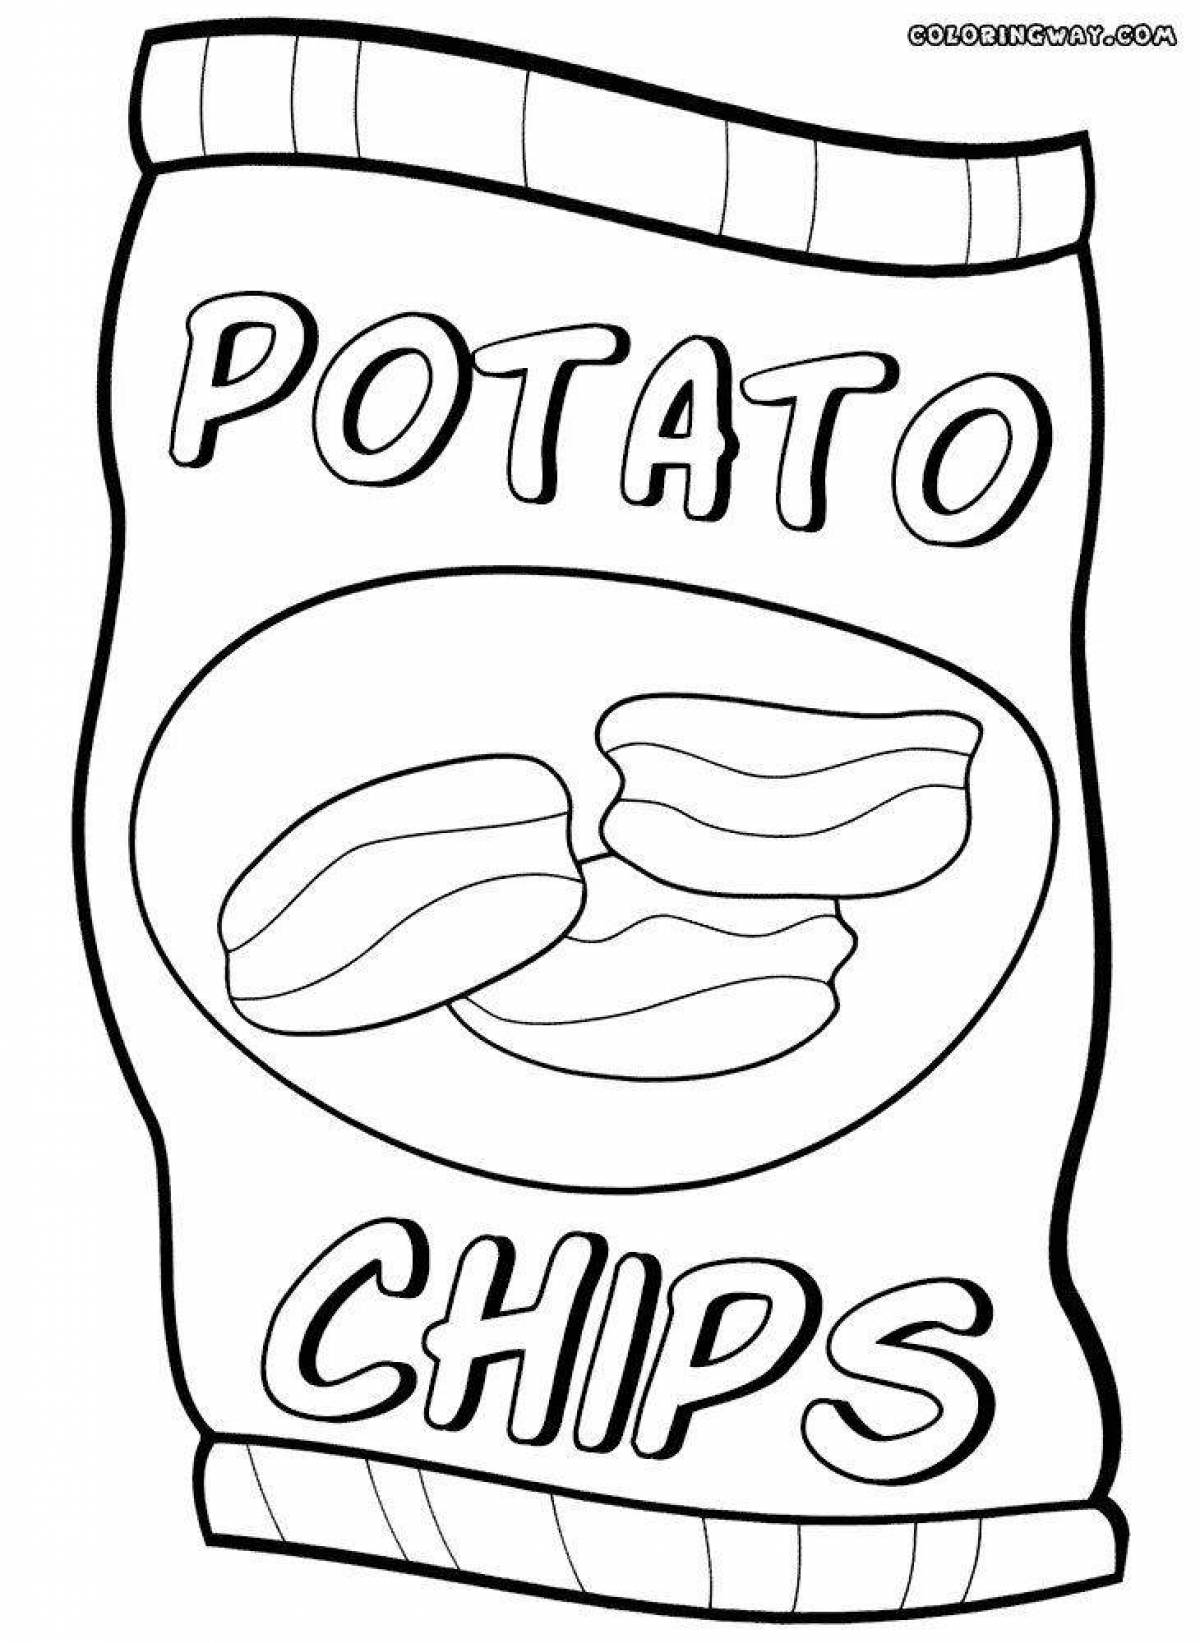 Coloring page attractive lace chips